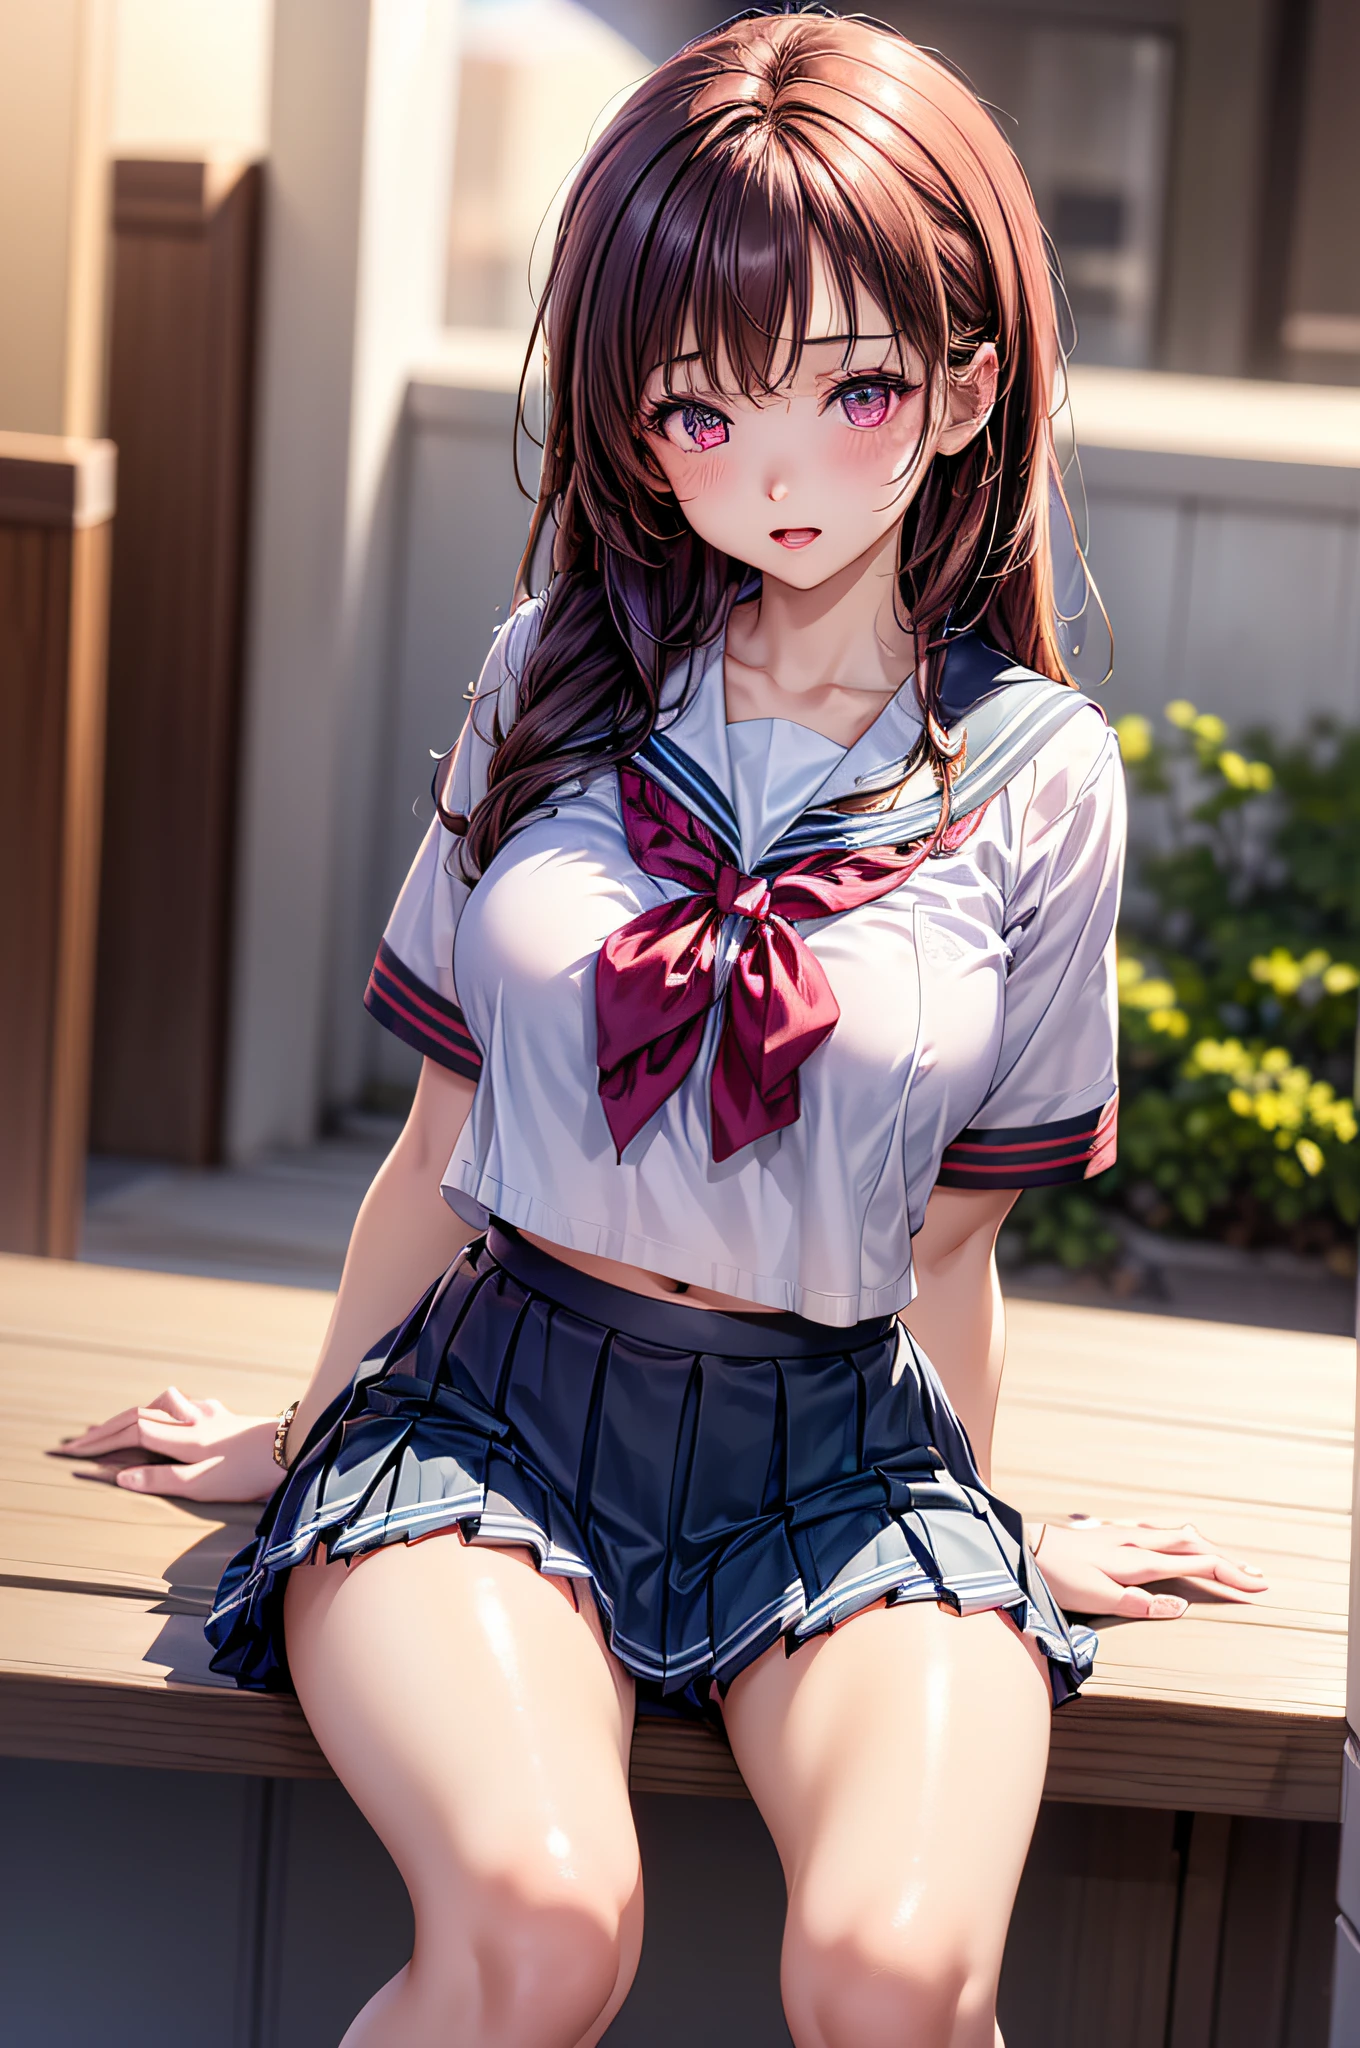 ((1girl in)), (Twin-tailed), Brown hair, Amazing face and eyes, Pink eyes, (amazingly beautiful girl), Brown hair, (High , Pleated mini-skirt:1.5), ((Best Quality)), (Ultra-detailed), (extremely detailed CG unified 8k wallpaper), Highly detailed, High-definition raw color photos, Professional Photography, (((Bokeh))), depth of fields, open your legs,